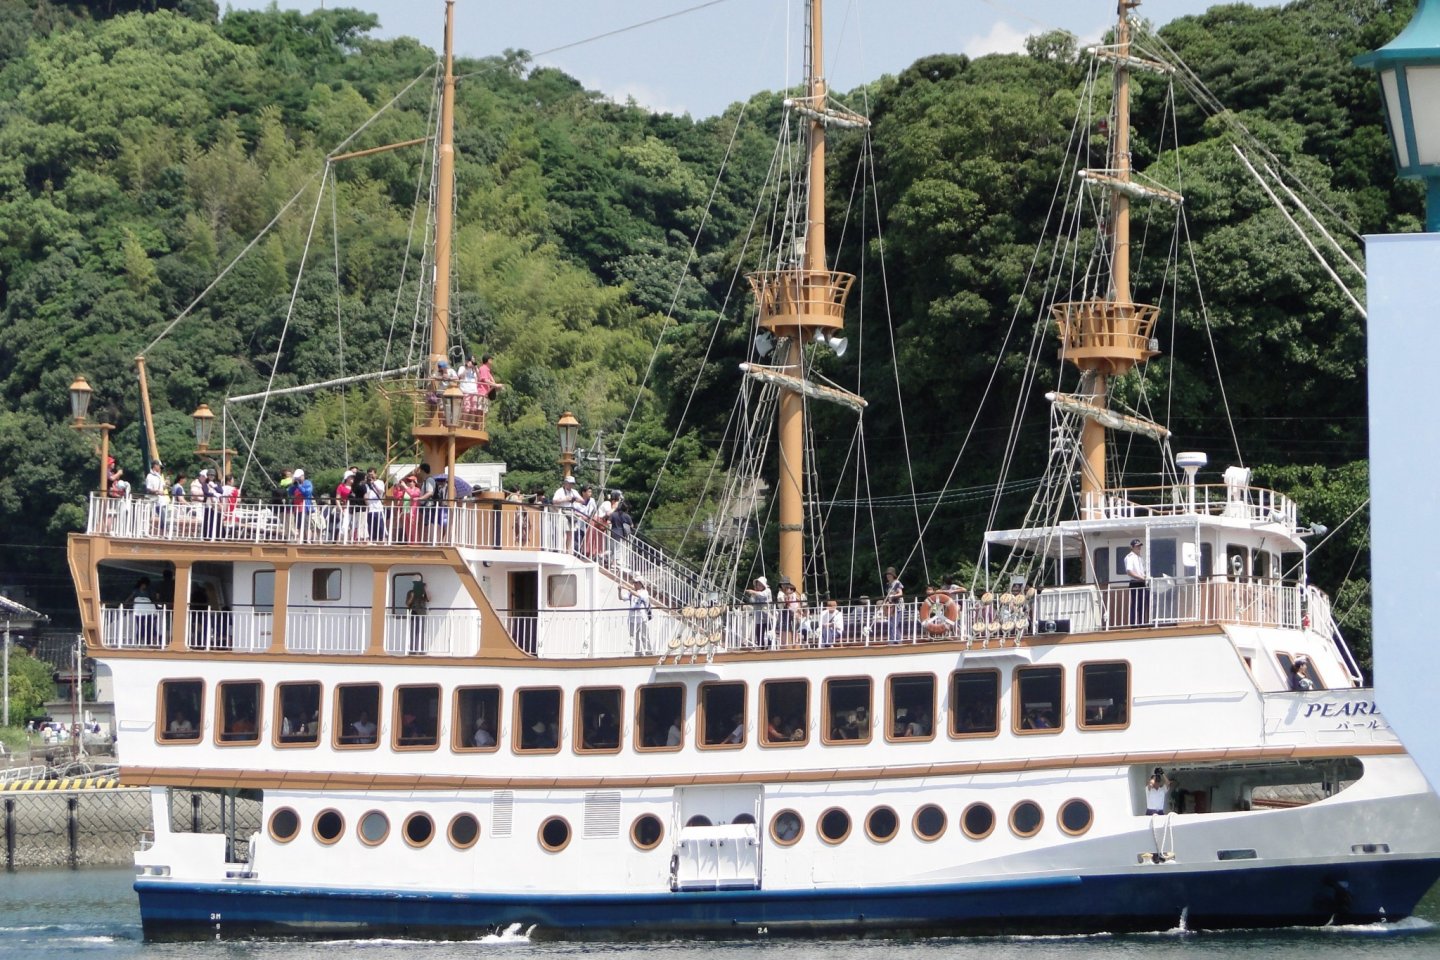 The Pearl Queen takes visitors on tours of Kujukushima National Park